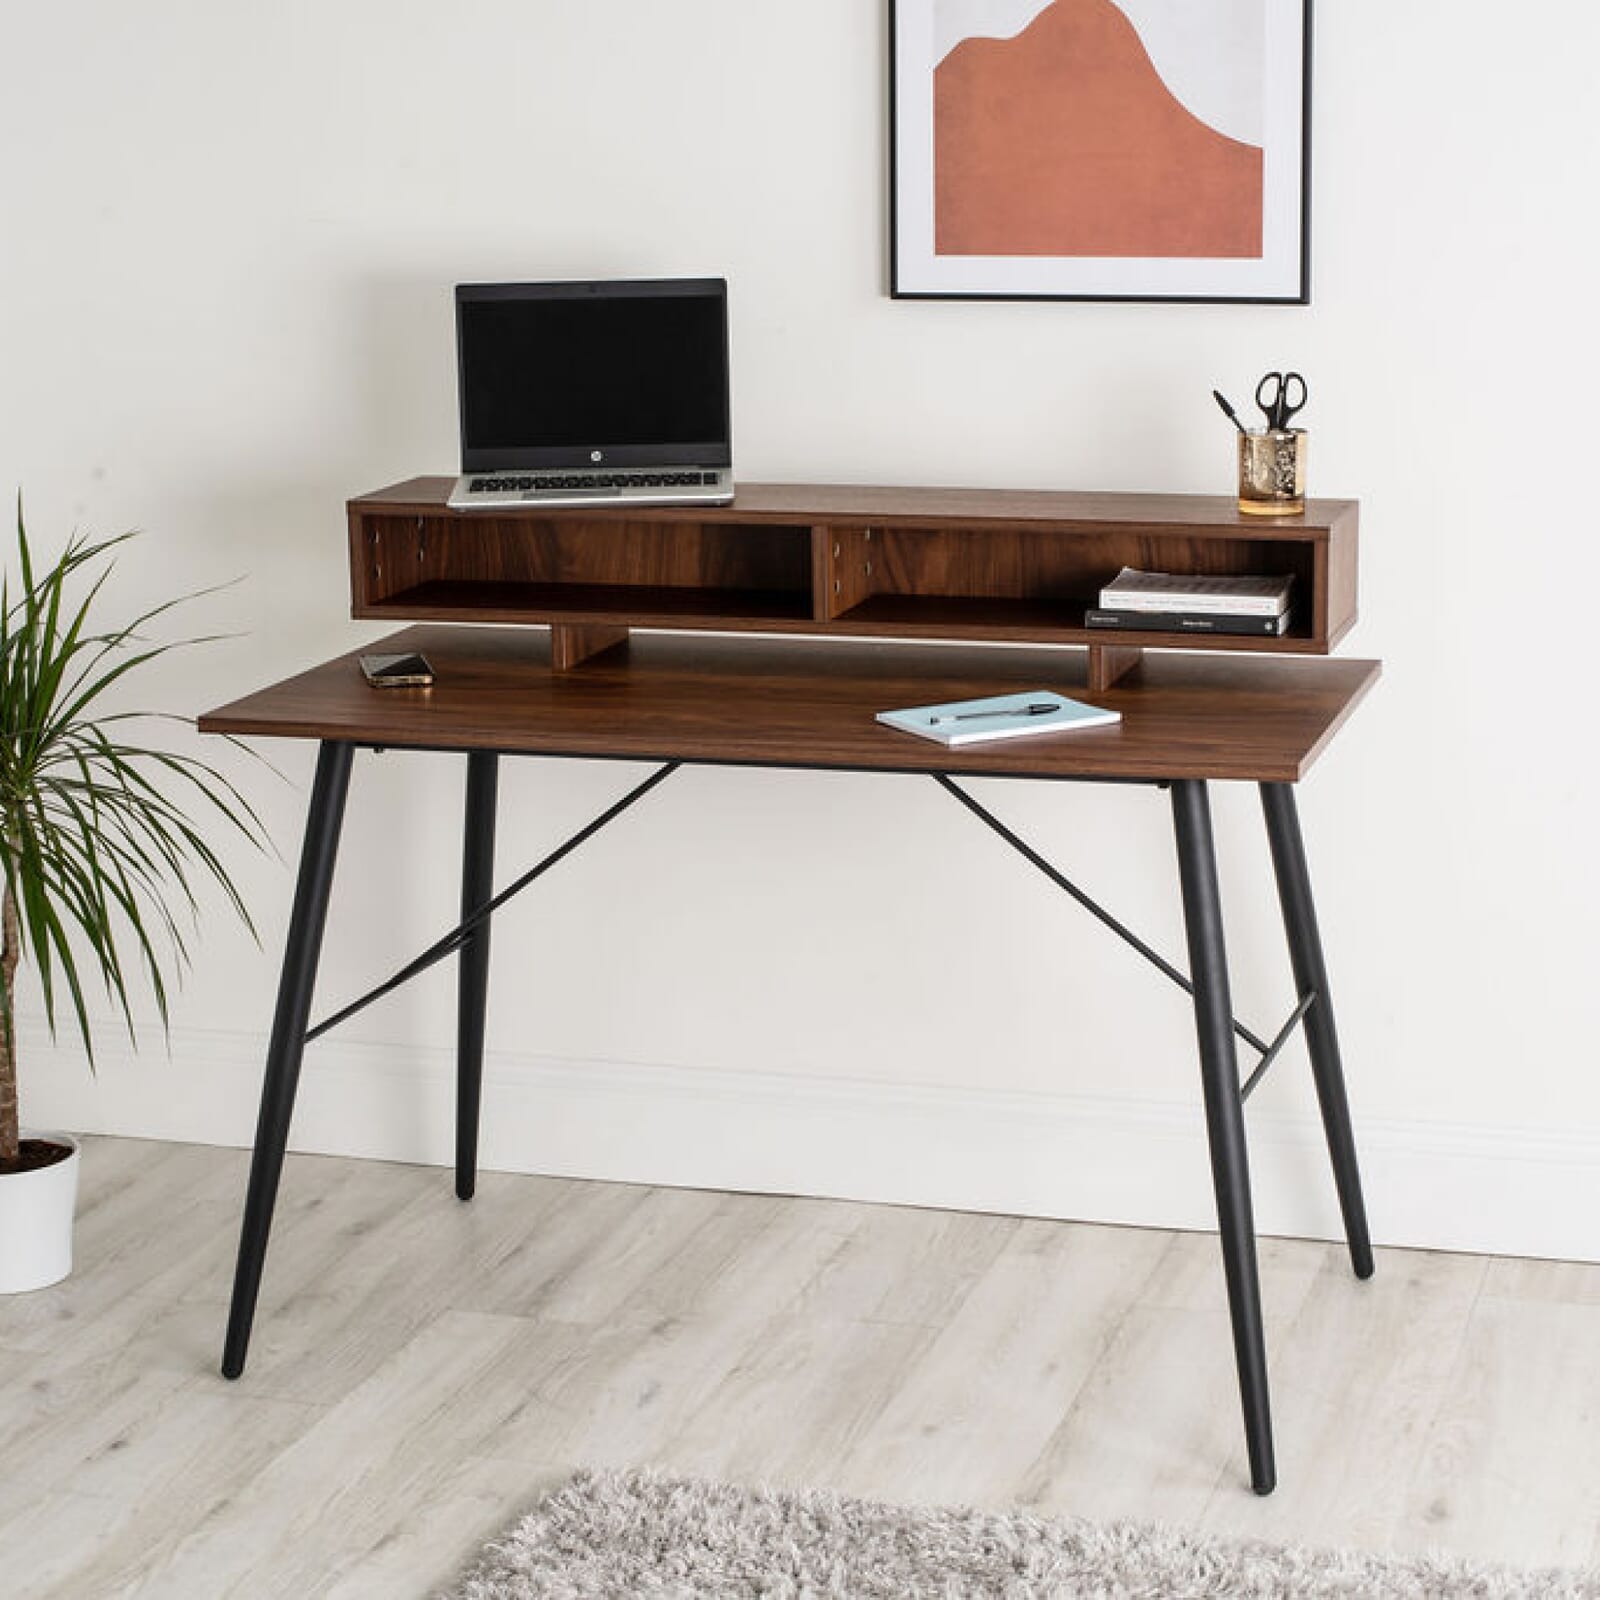 The Axel Smart Desk from Koble features an integrated wireless charging point to keep your phone topped up while you work. 